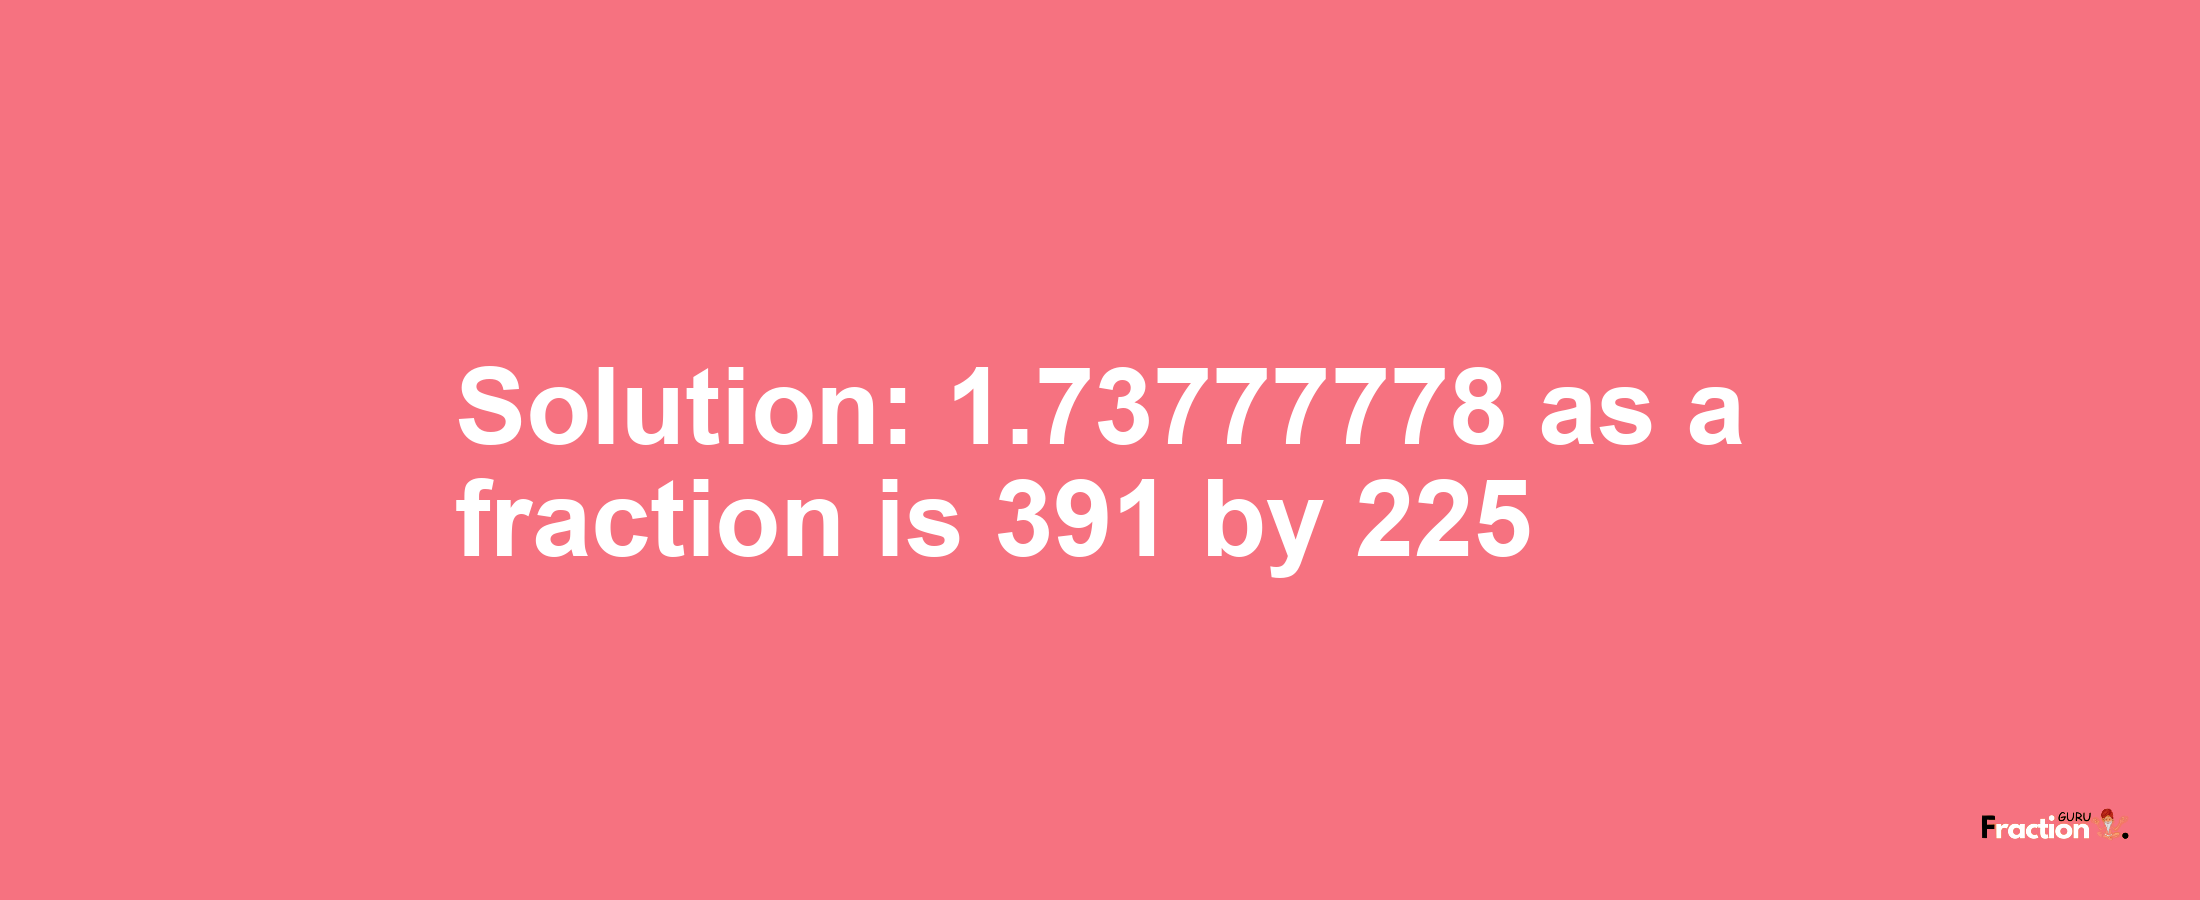 Solution:1.73777778 as a fraction is 391/225